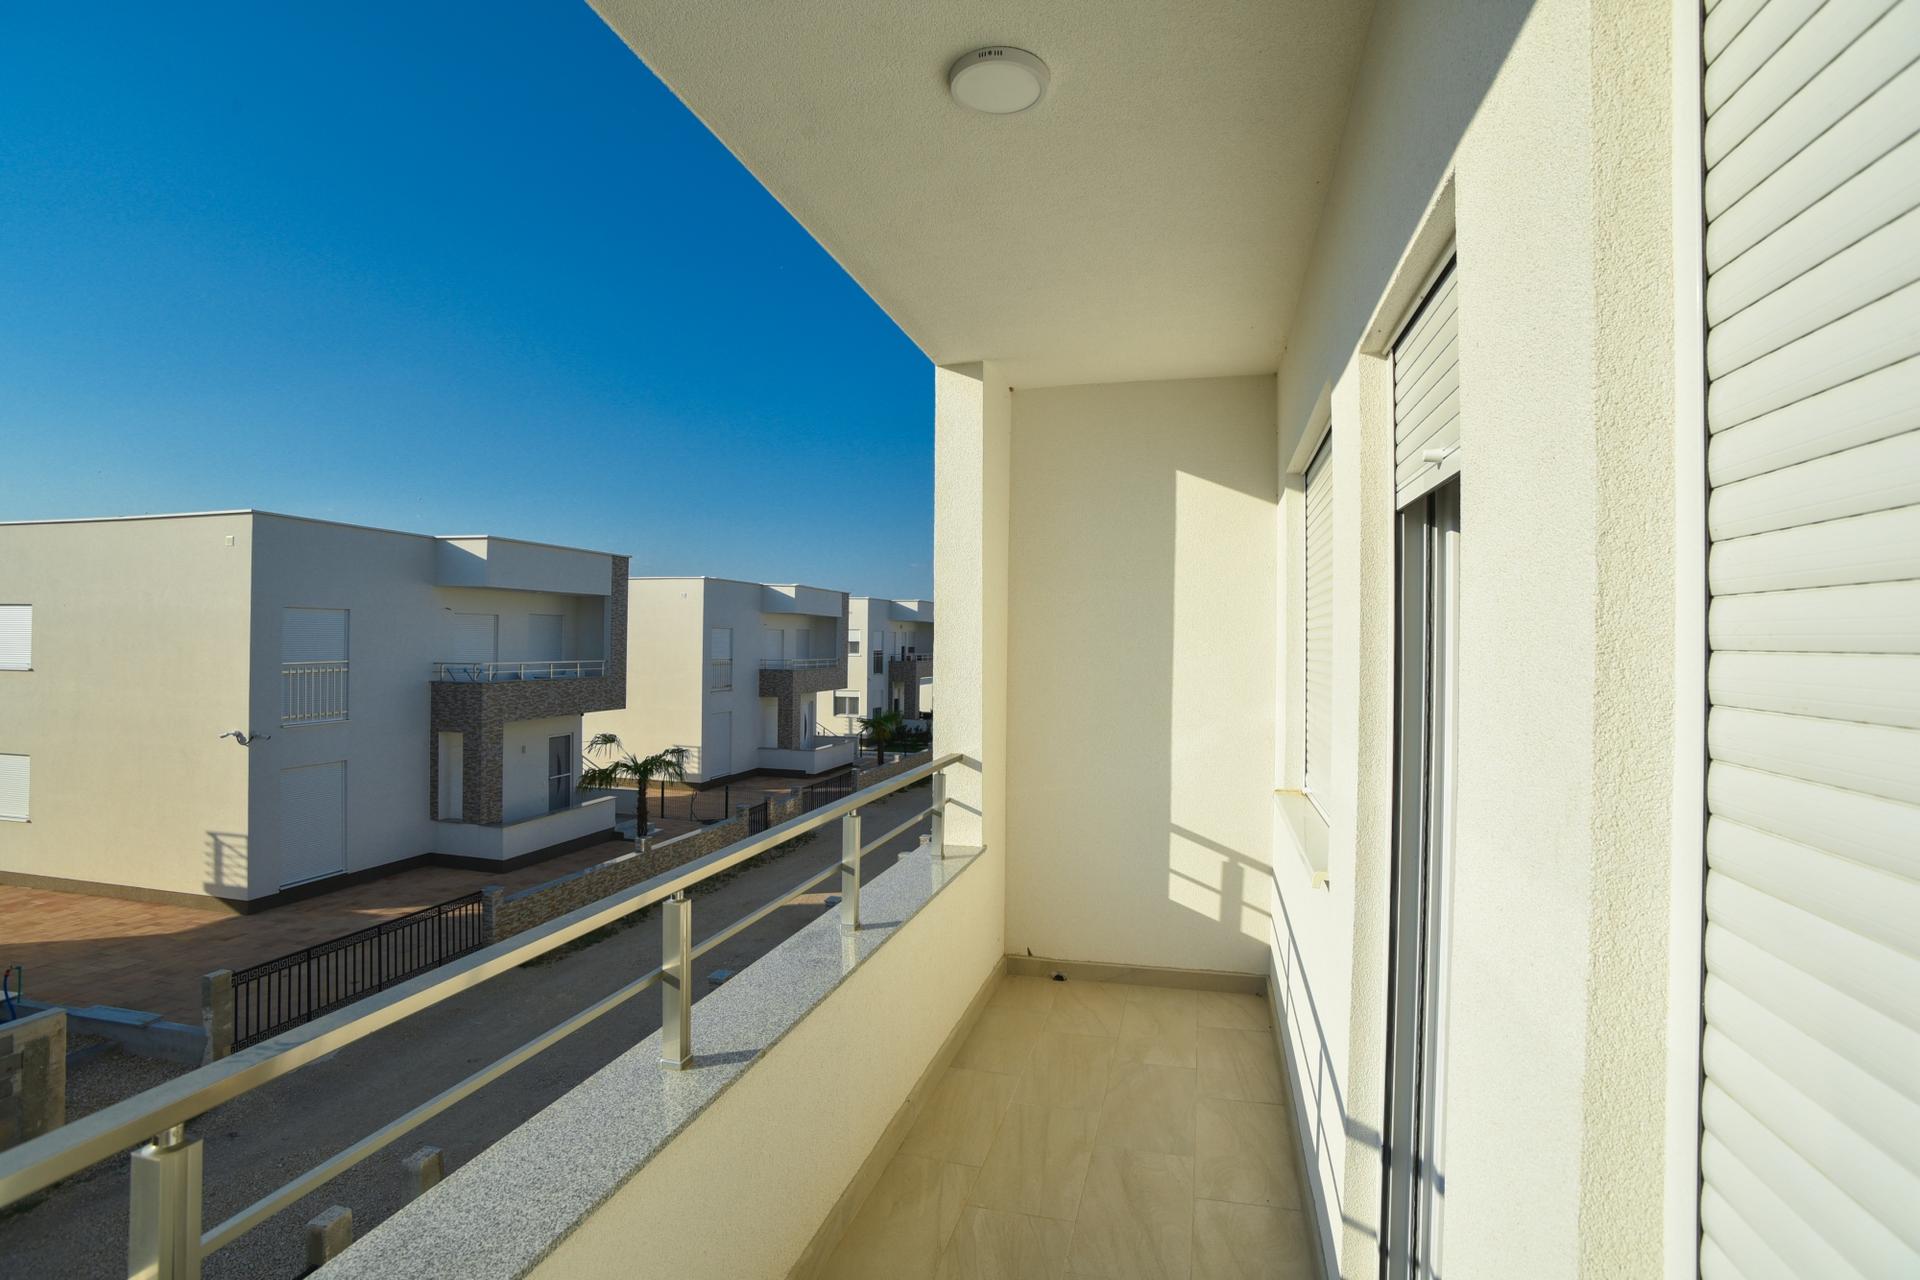 Step out onto the balcony and take in the fresh air into your lungs!